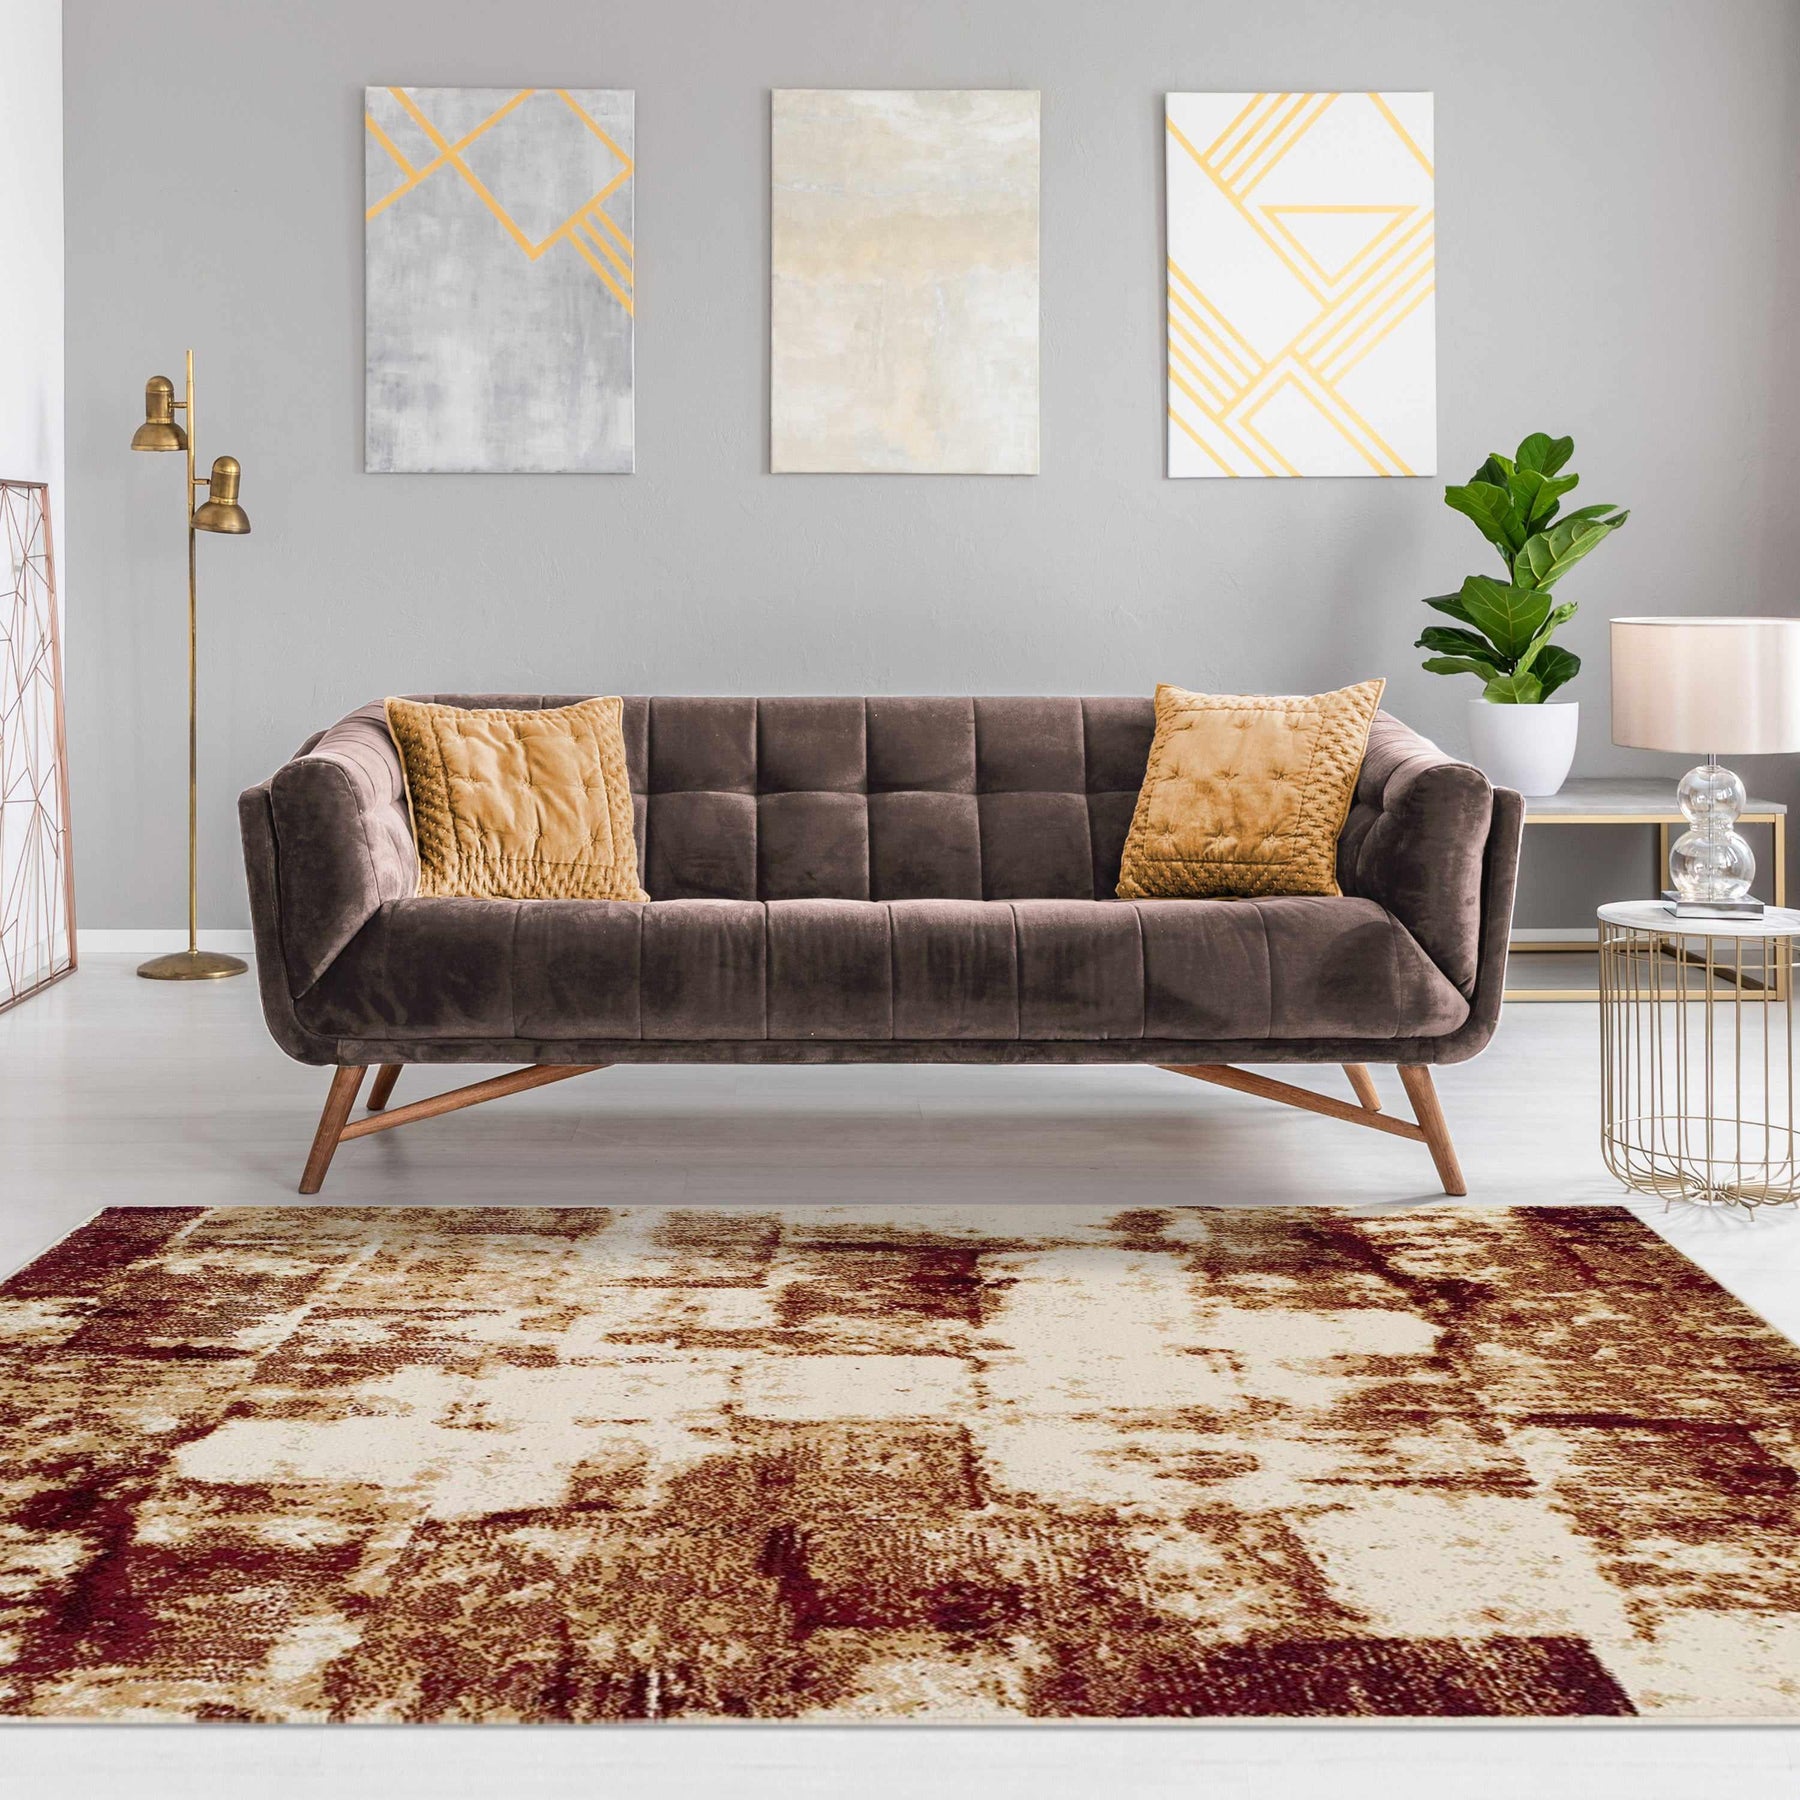 Distressed Abstract Geometric Industrial Area Rug 